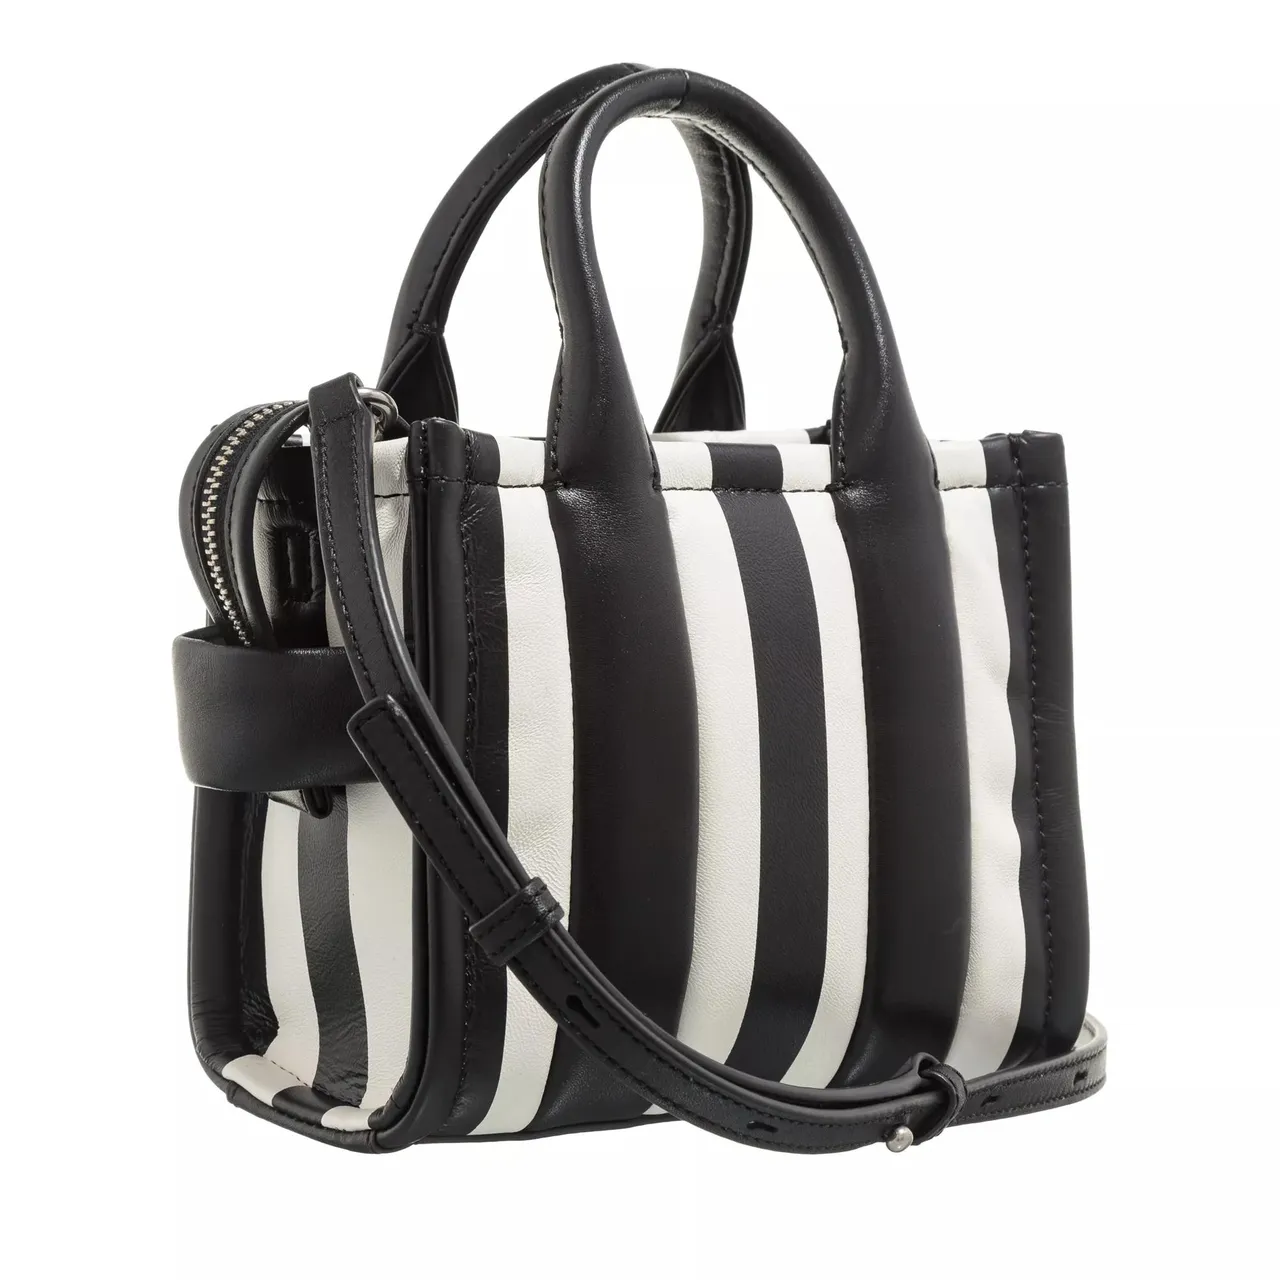 Marc Jacobs Tote Bags - Vertical Stripe Leather Tote Bag - black - Tote Bags for ladies